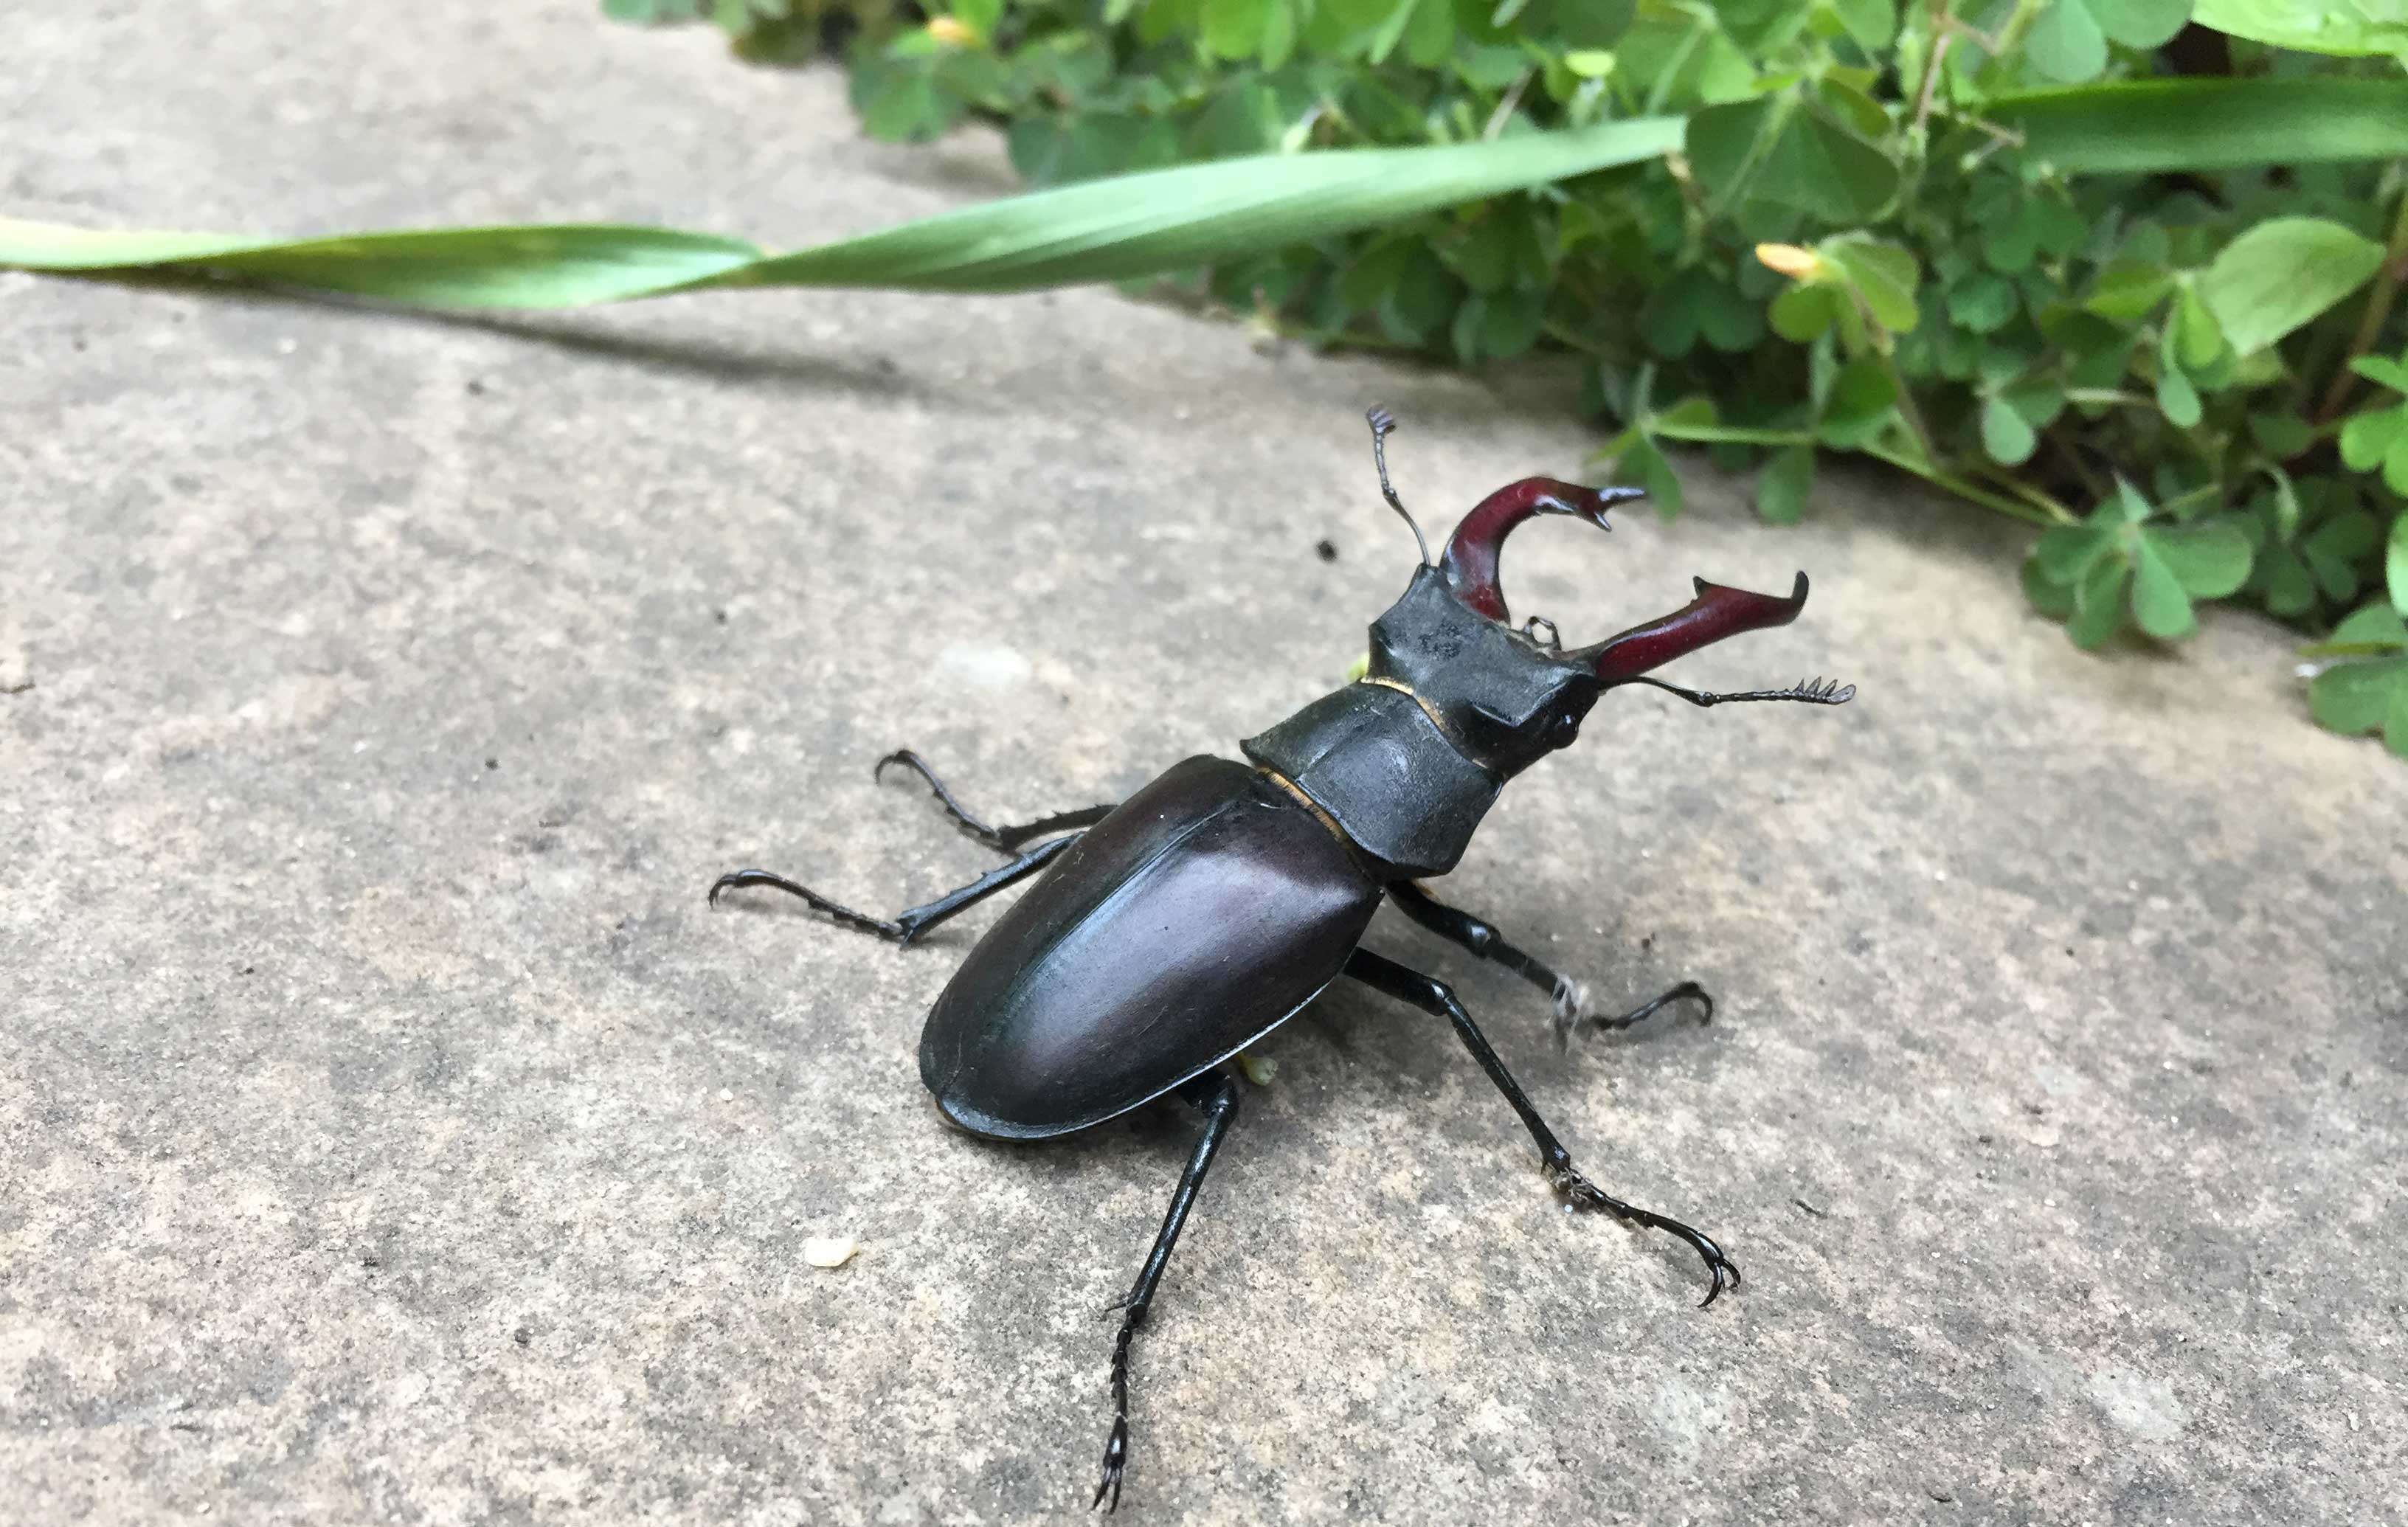 stag beetles. image by Charlotte-Seaton